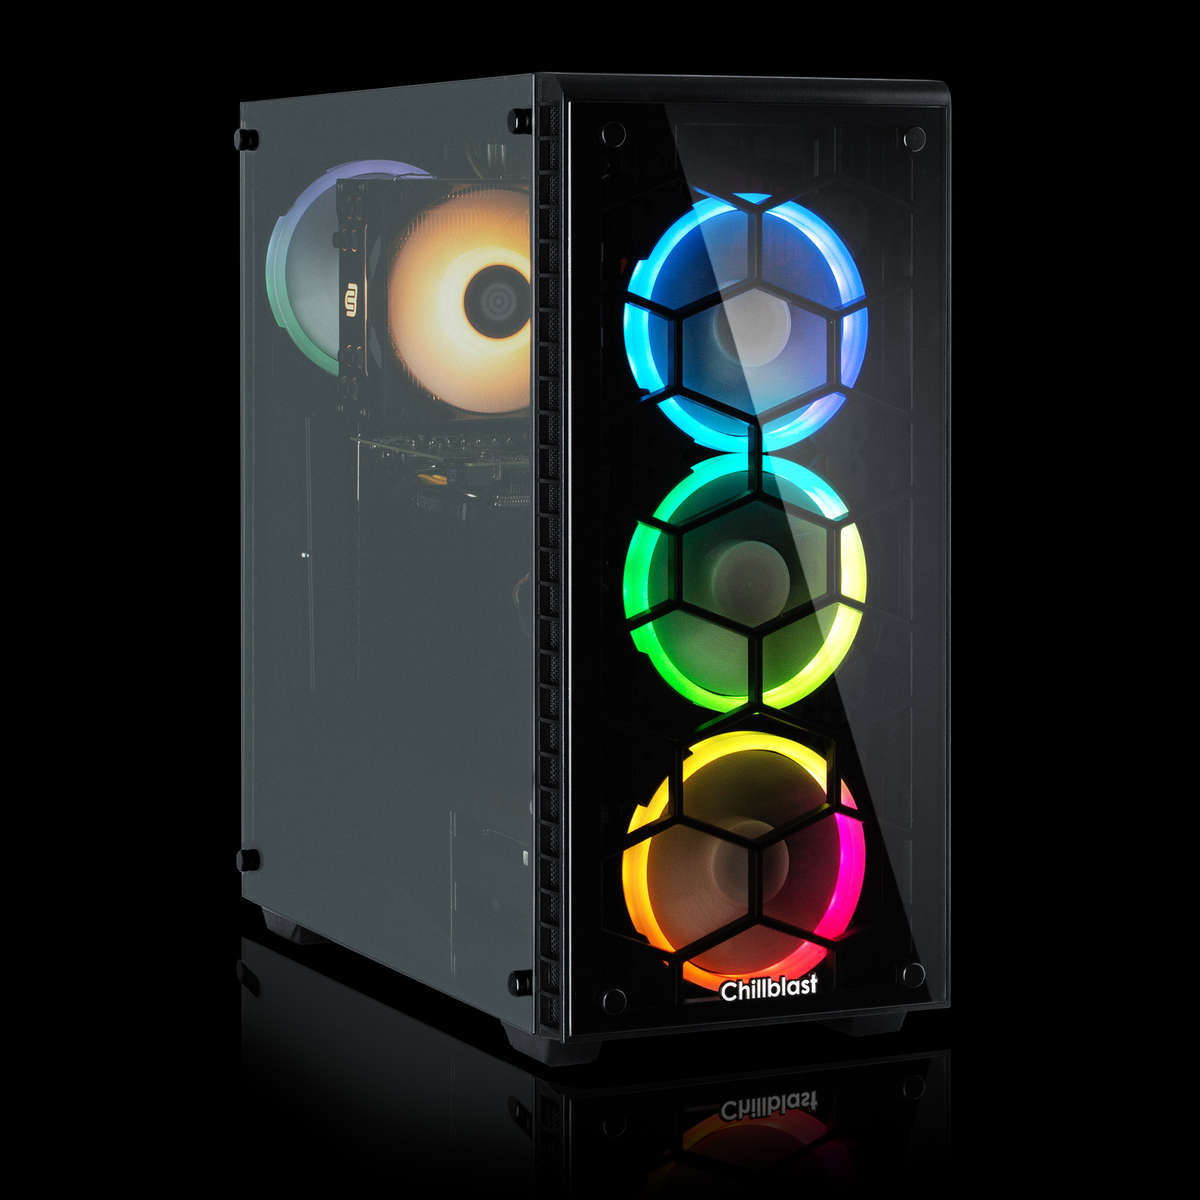 Image of the Chillblast Fusion Sorcerer gaming PC